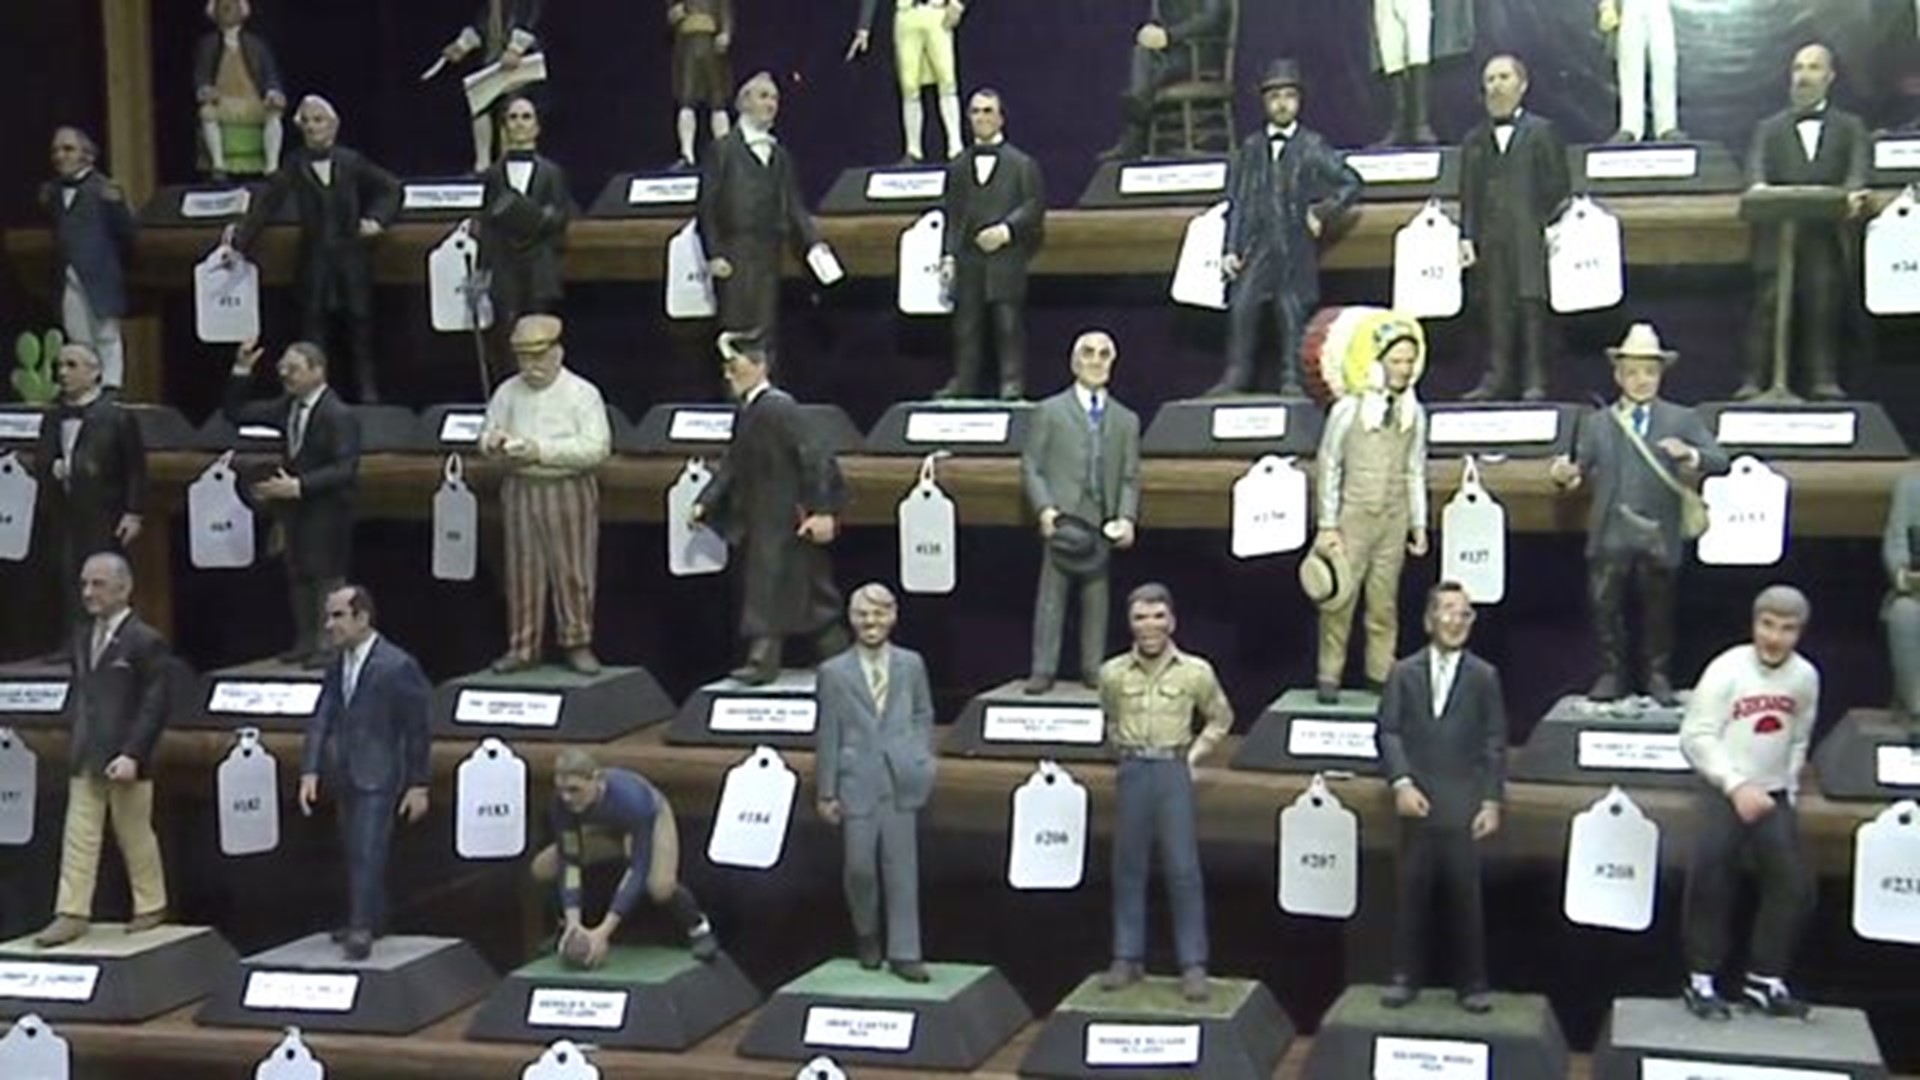 A preview of the wax figure auction at the Hall of Presidents and First Ladies in Gettysburg